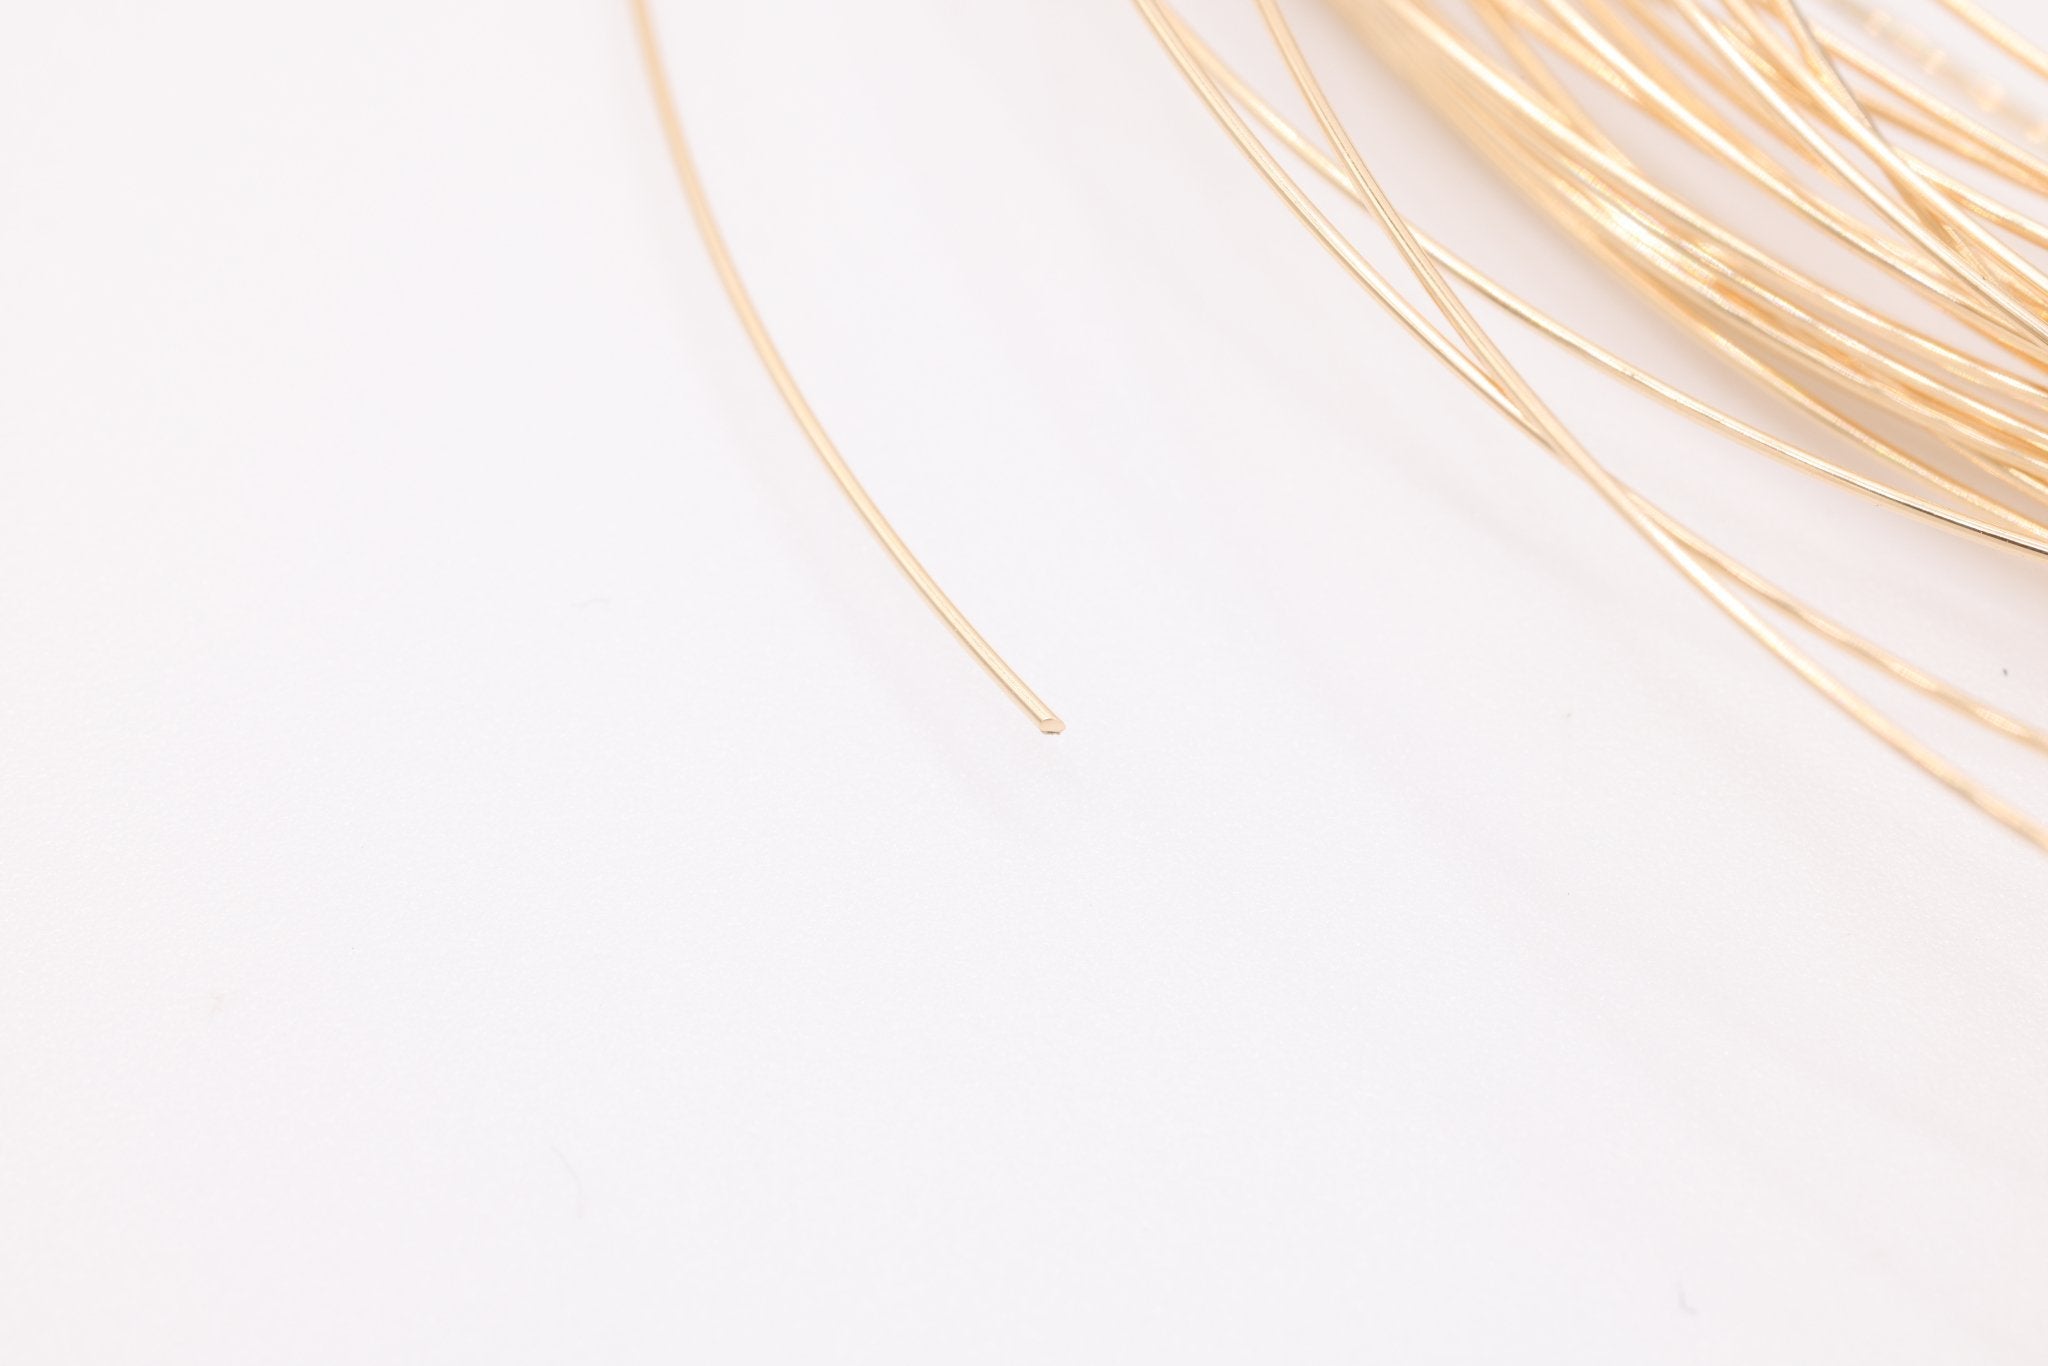 14k Gold Filled Wire, 16 Gauge 1.27mm, Gold Wire, Half Hard Jewelry Wire - HarperCrown